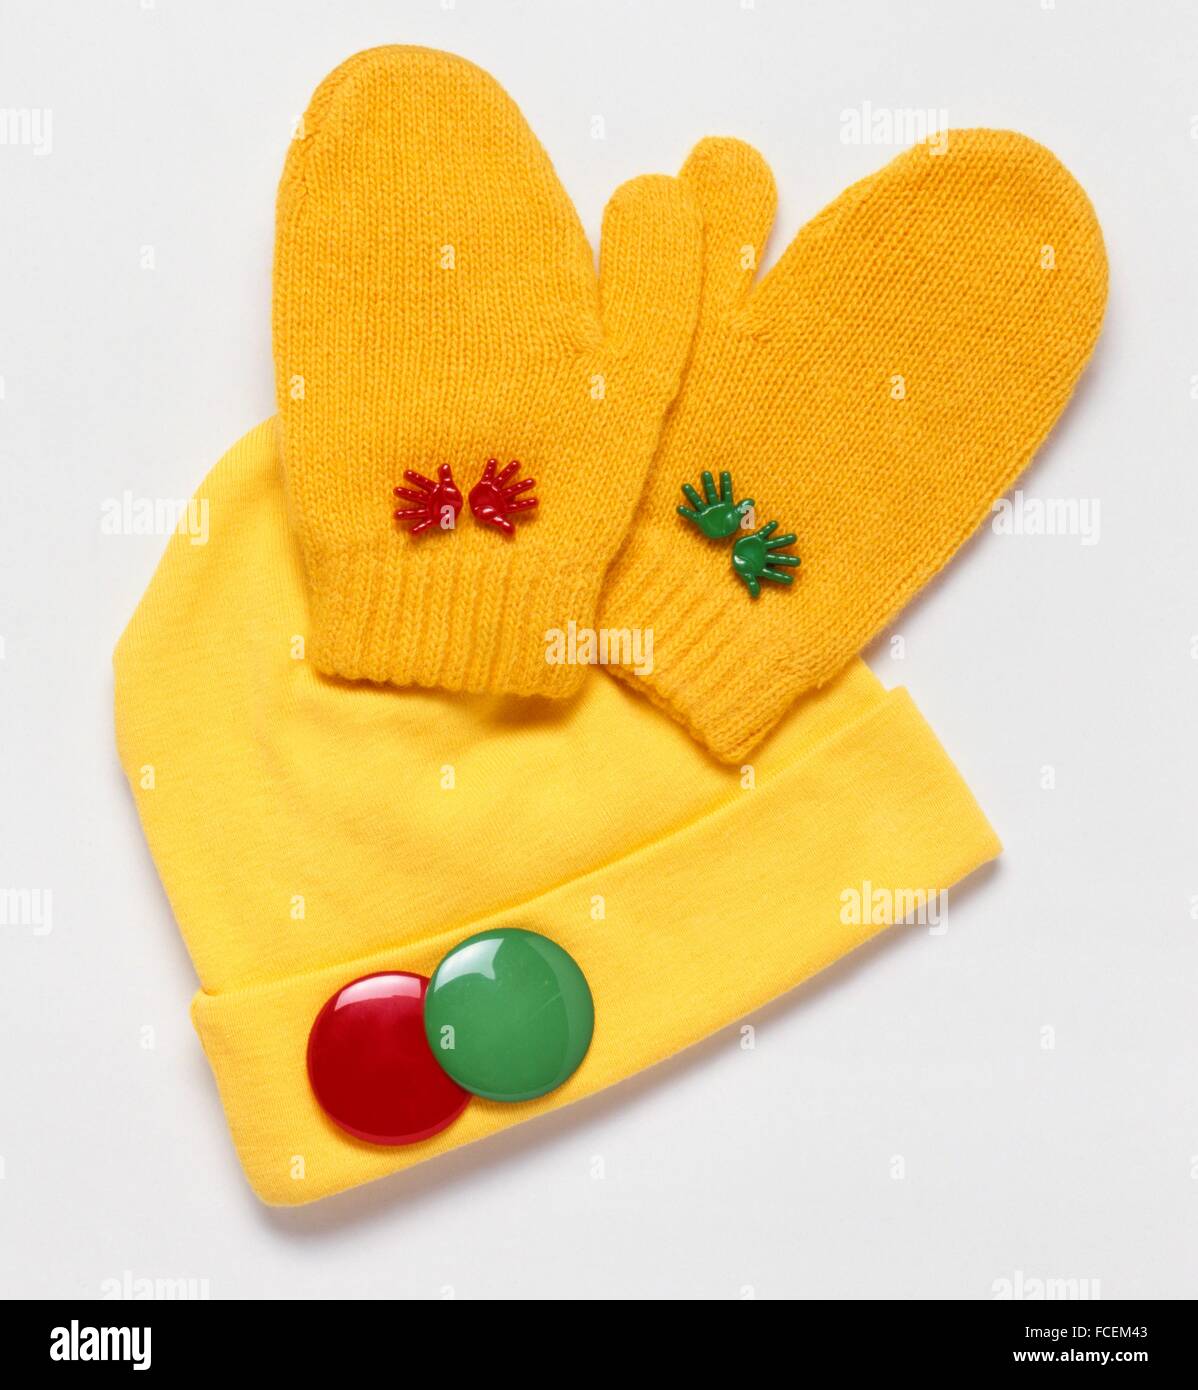 Yellow hat and gloves with red and green decorations Stock Photo